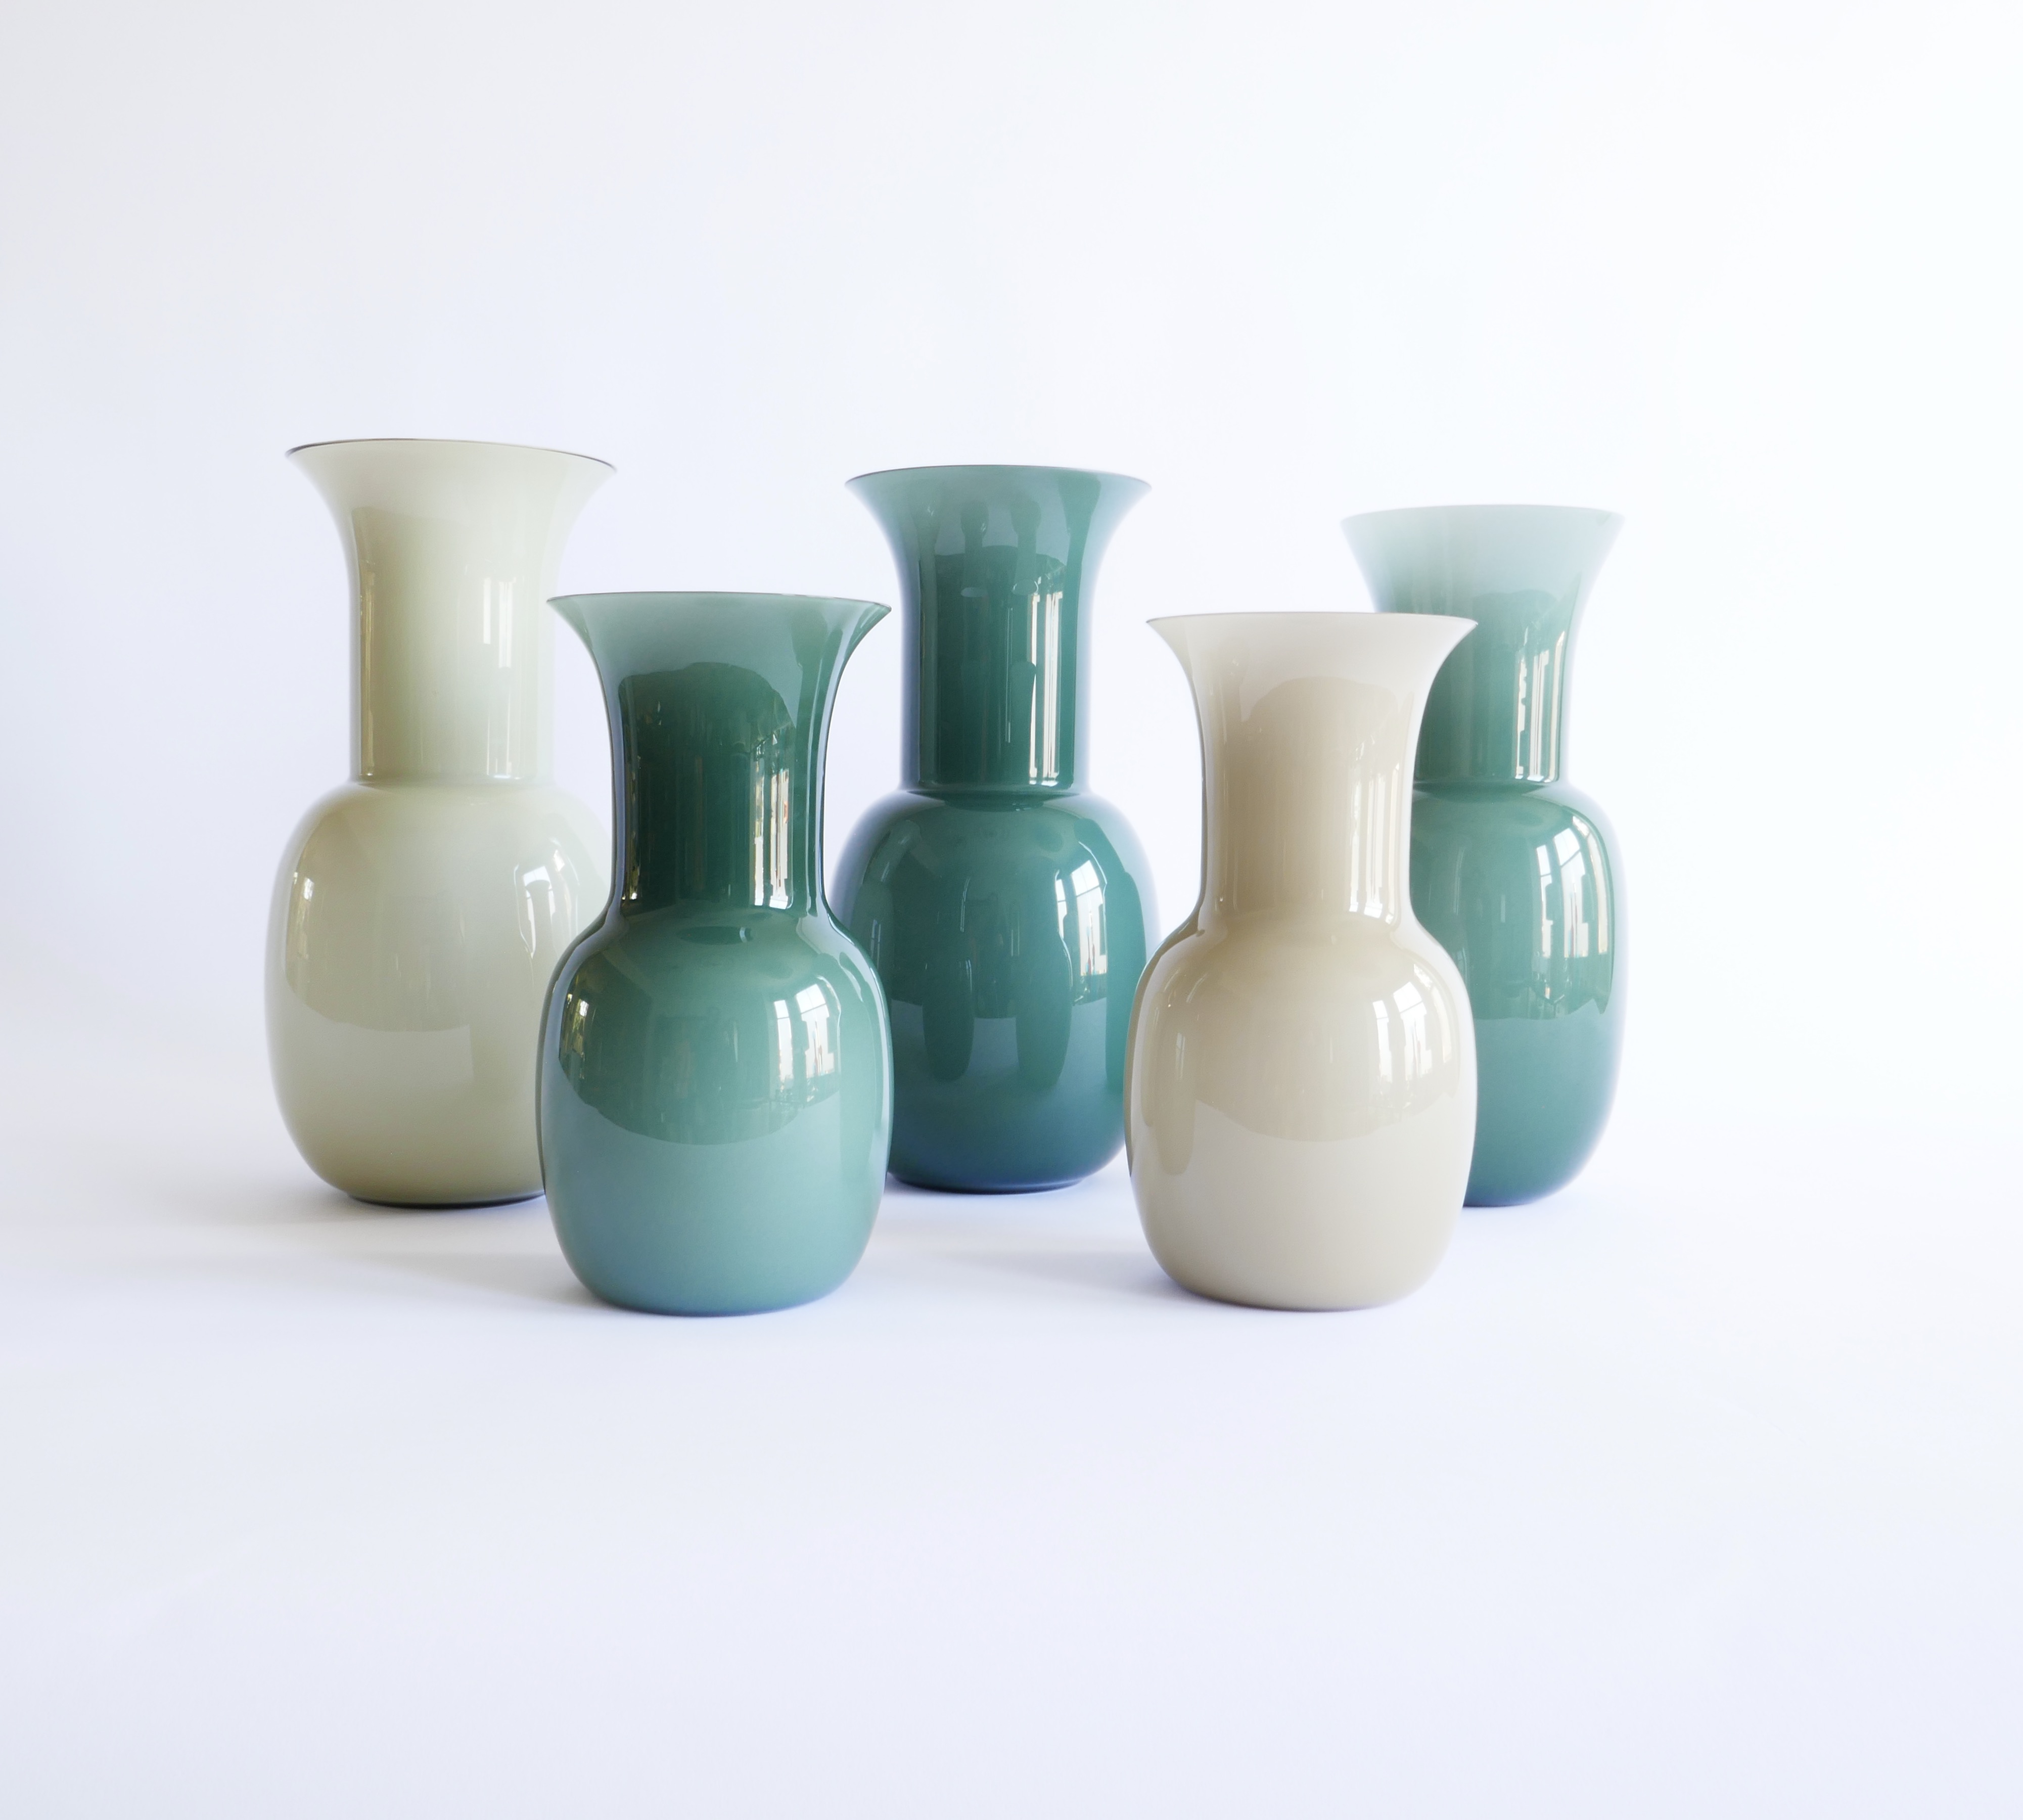 Sold - Murano Glass Vases by Aureliano Toso, 2000, Italy